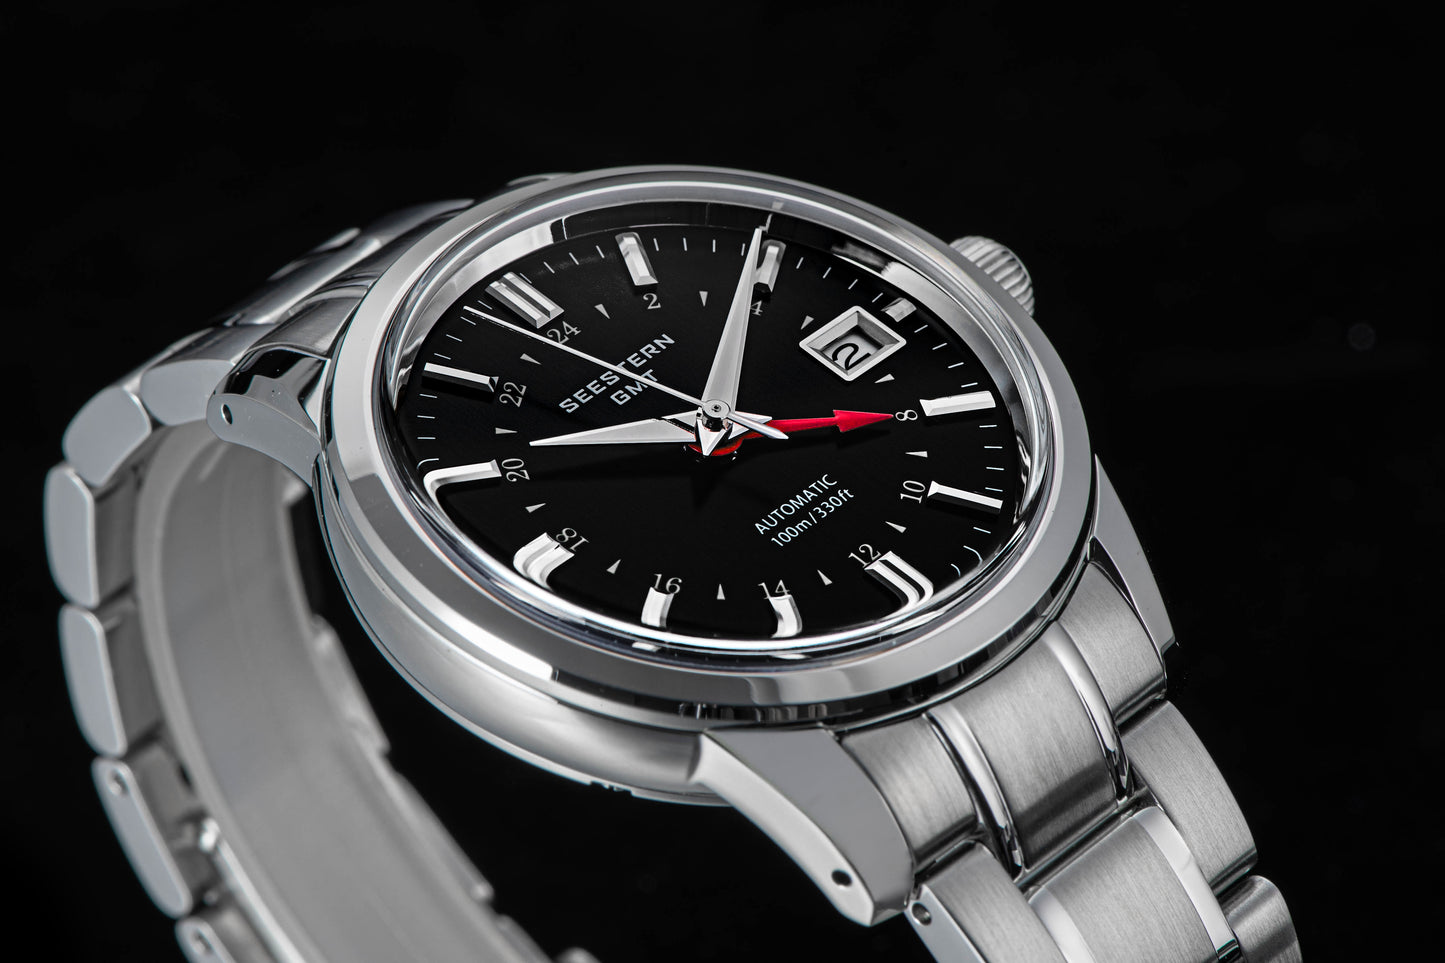 Seestern S446 GMT Watch Black Dial (Seiko NH34 GMT movement)